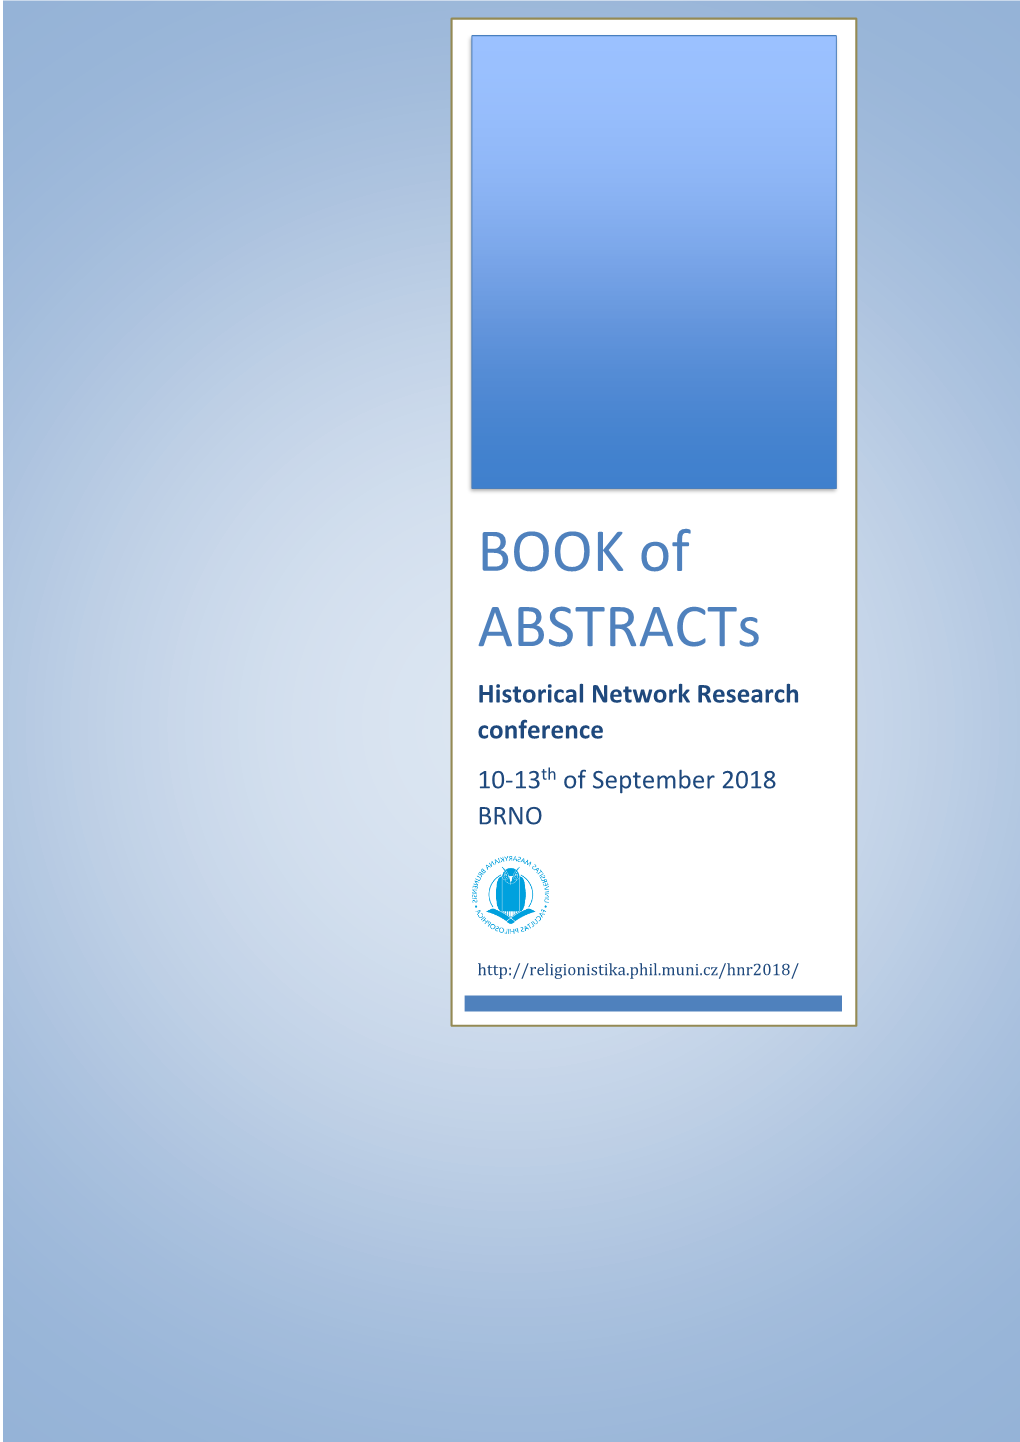 BOOK of Abstracts Historical Network Research Conference 10-13Th of September 2018 BRNO